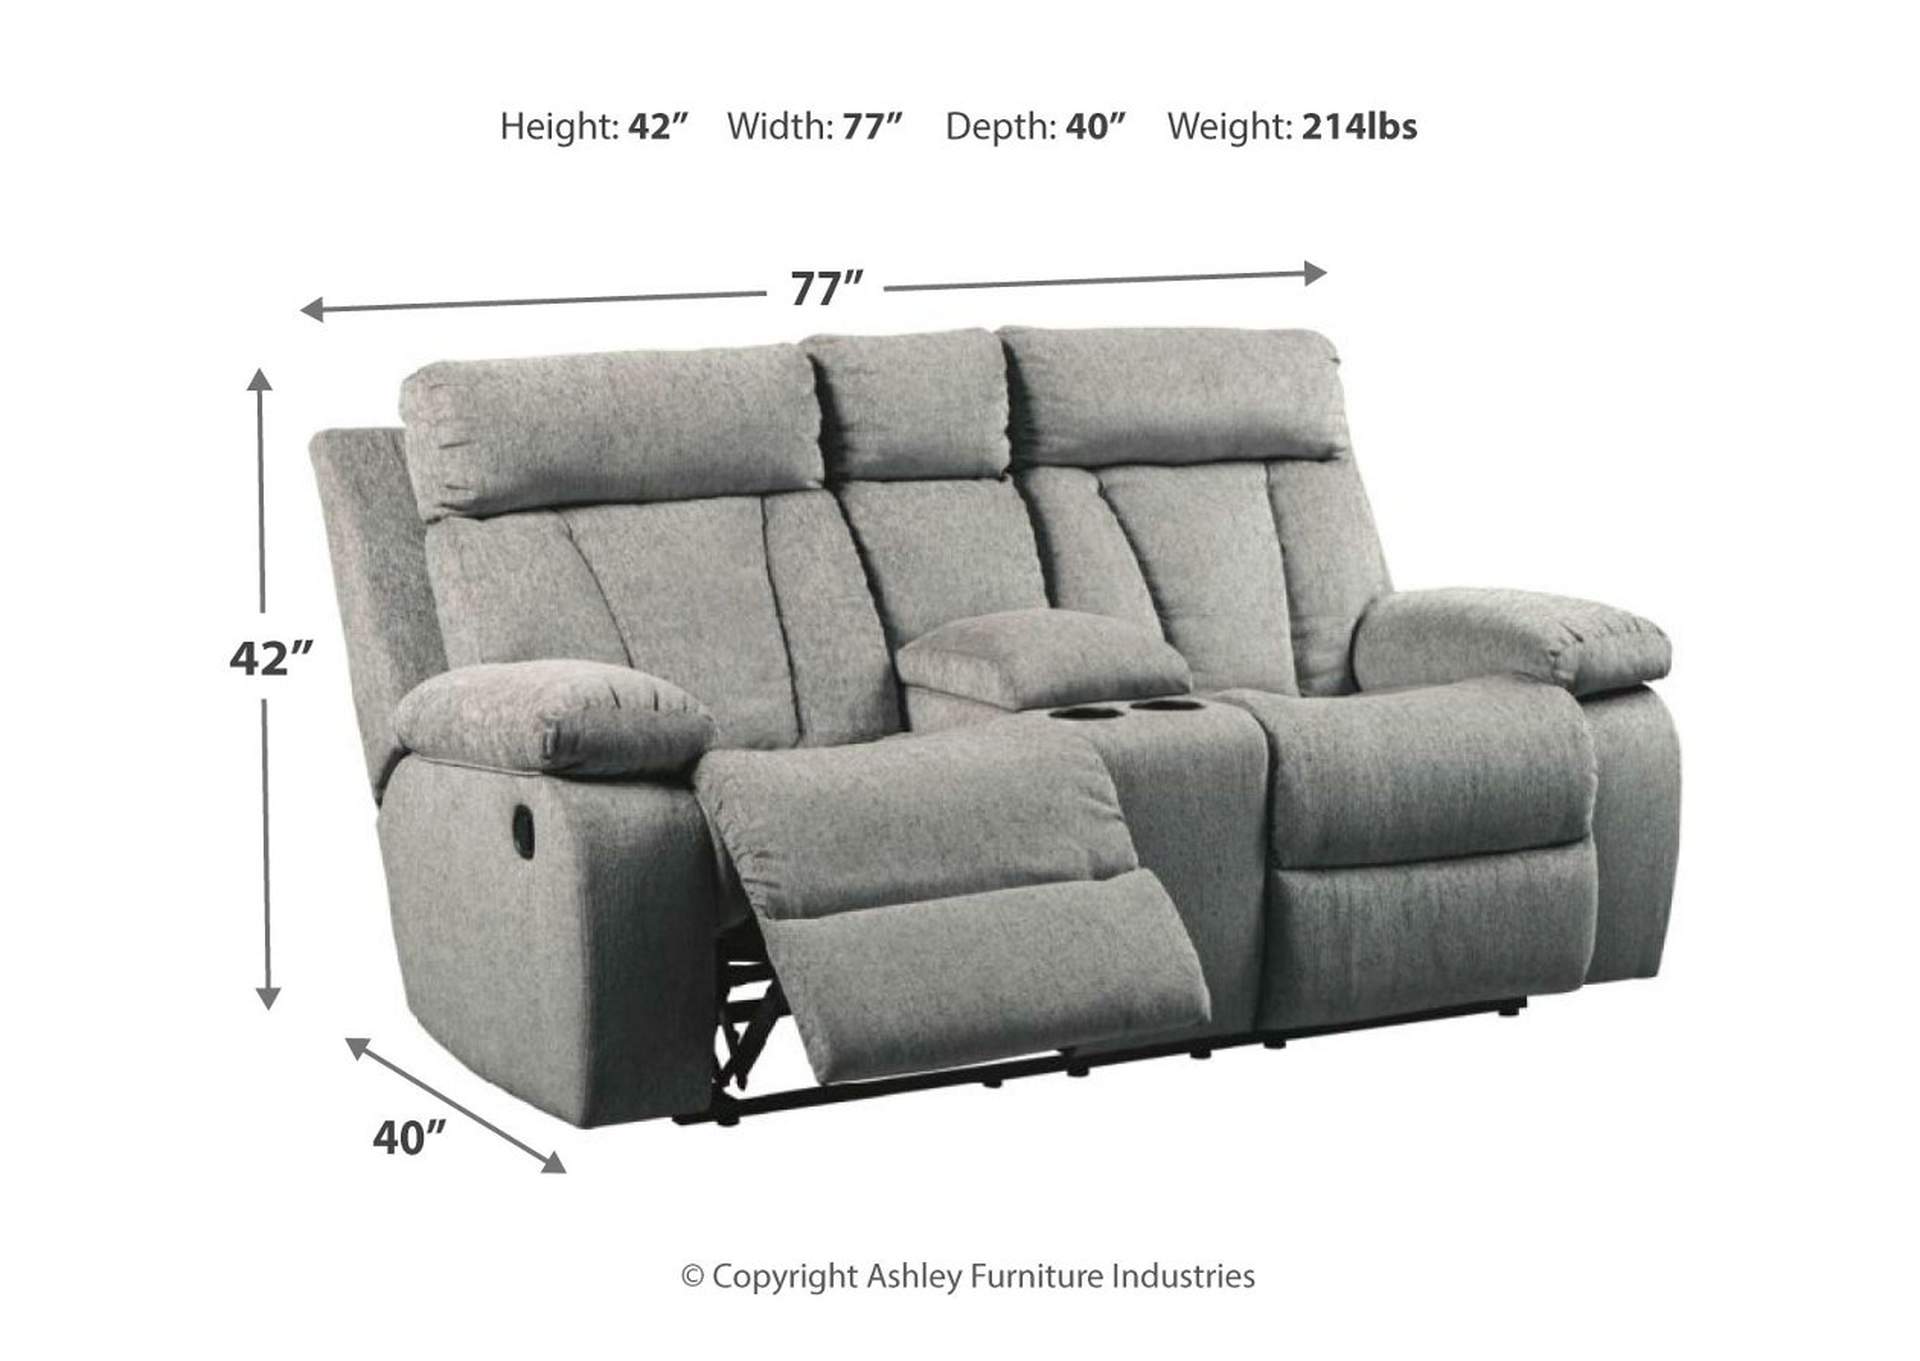 Mitchiner Reclining Sofa and Loveseat,Signature Design By Ashley